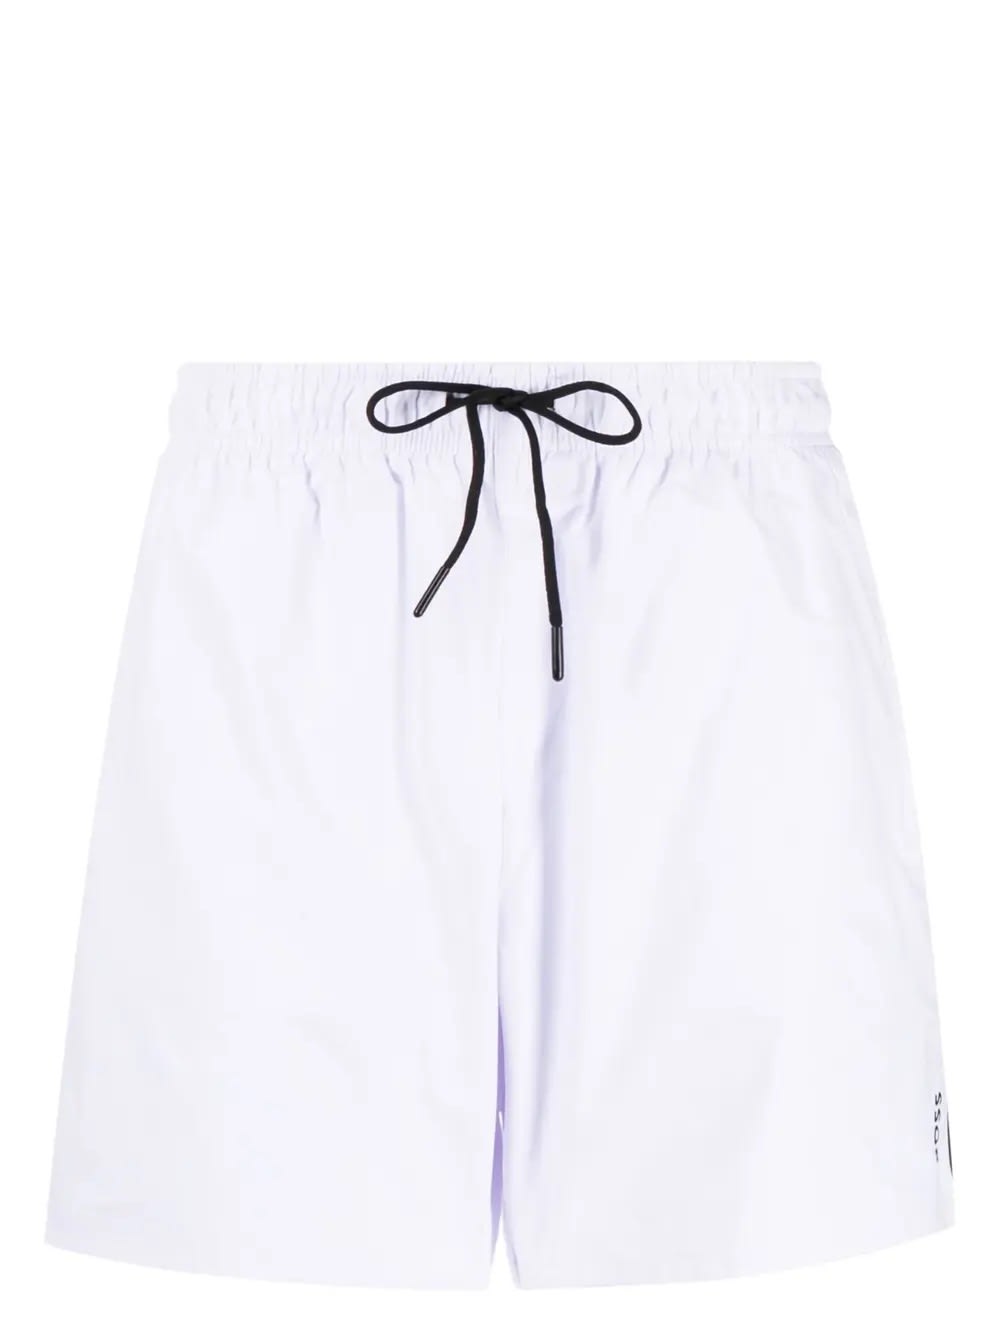 White Beach Boxers With Typical Brand Stripes And Logo